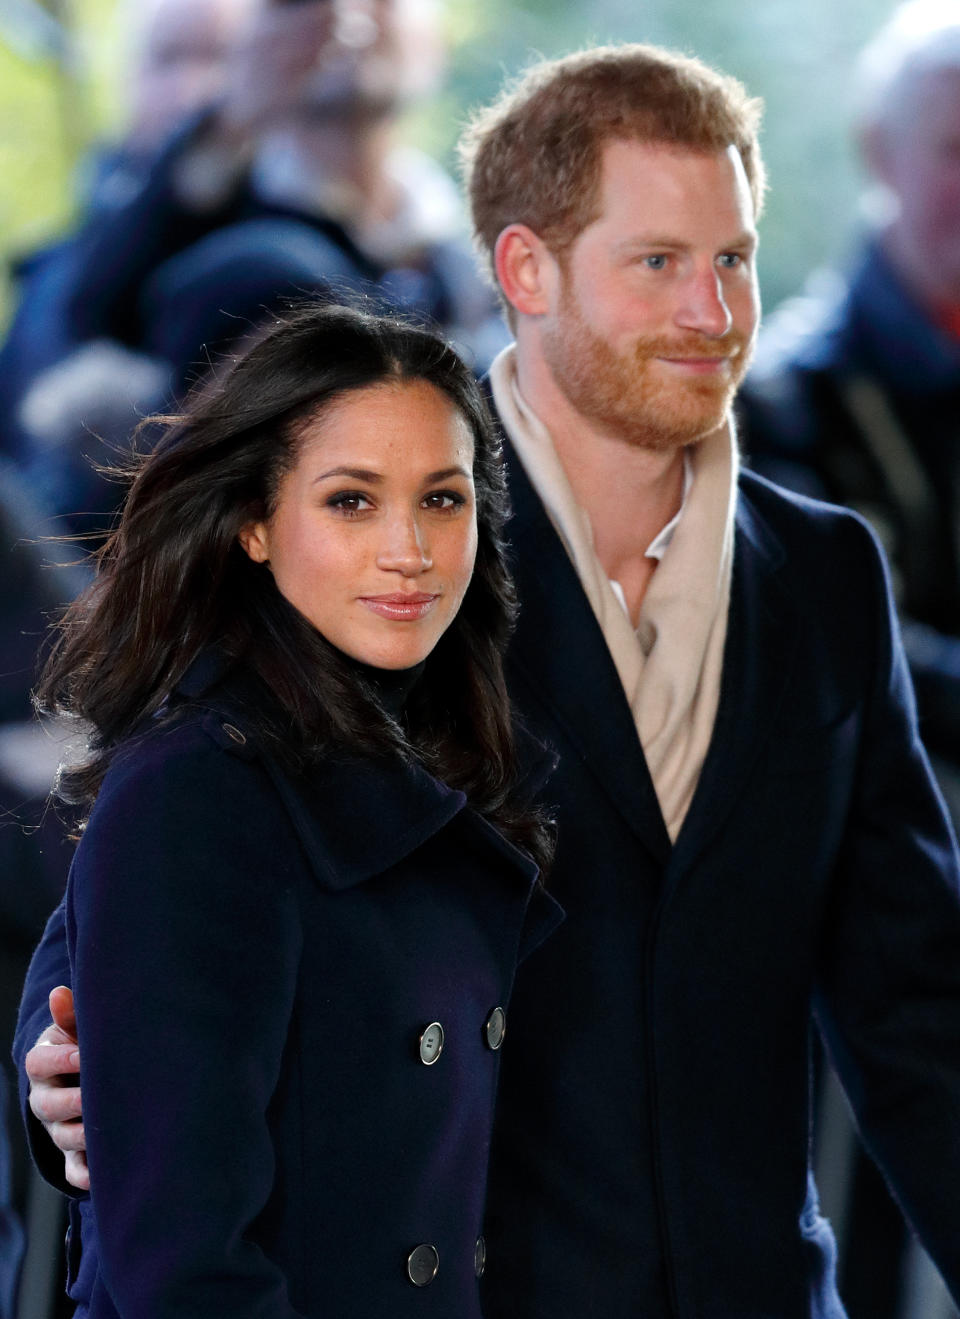 Prince Harry and Meghan Markle on an official visit wearing black coats